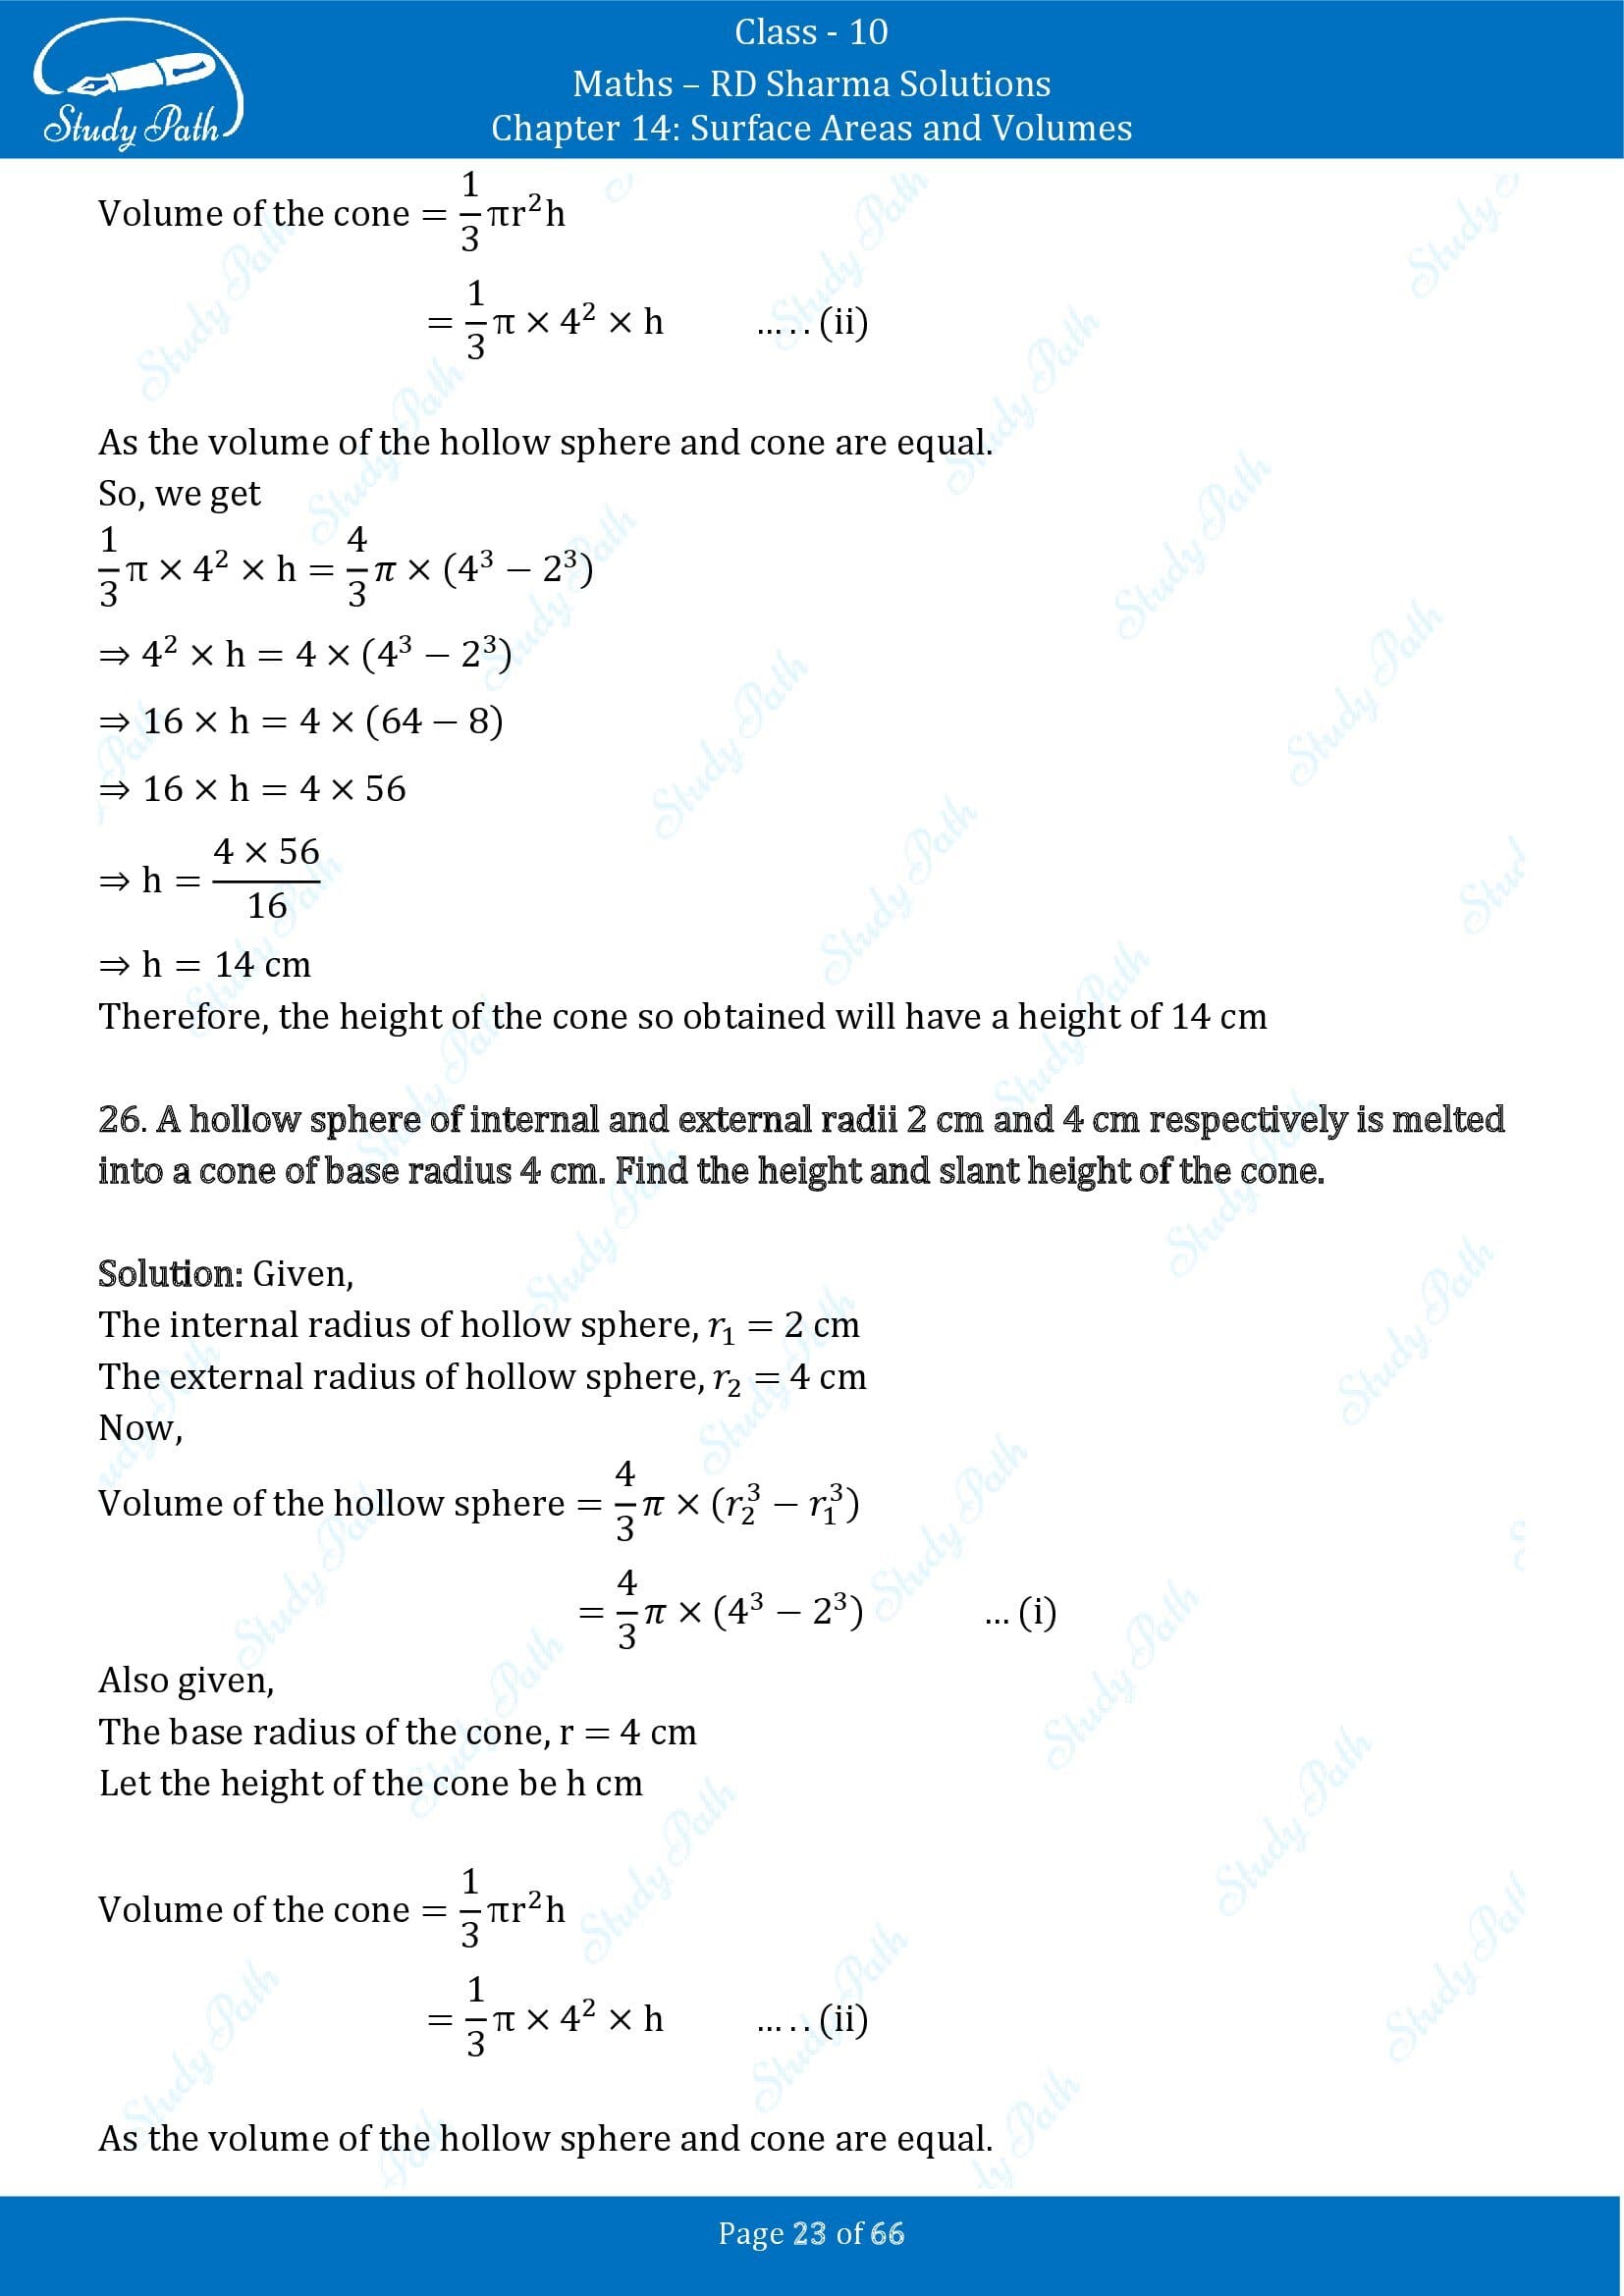 RD Sharma Solutions Class 10 Chapter 14 Surface Areas and Volumes Exercise 14.1 00023